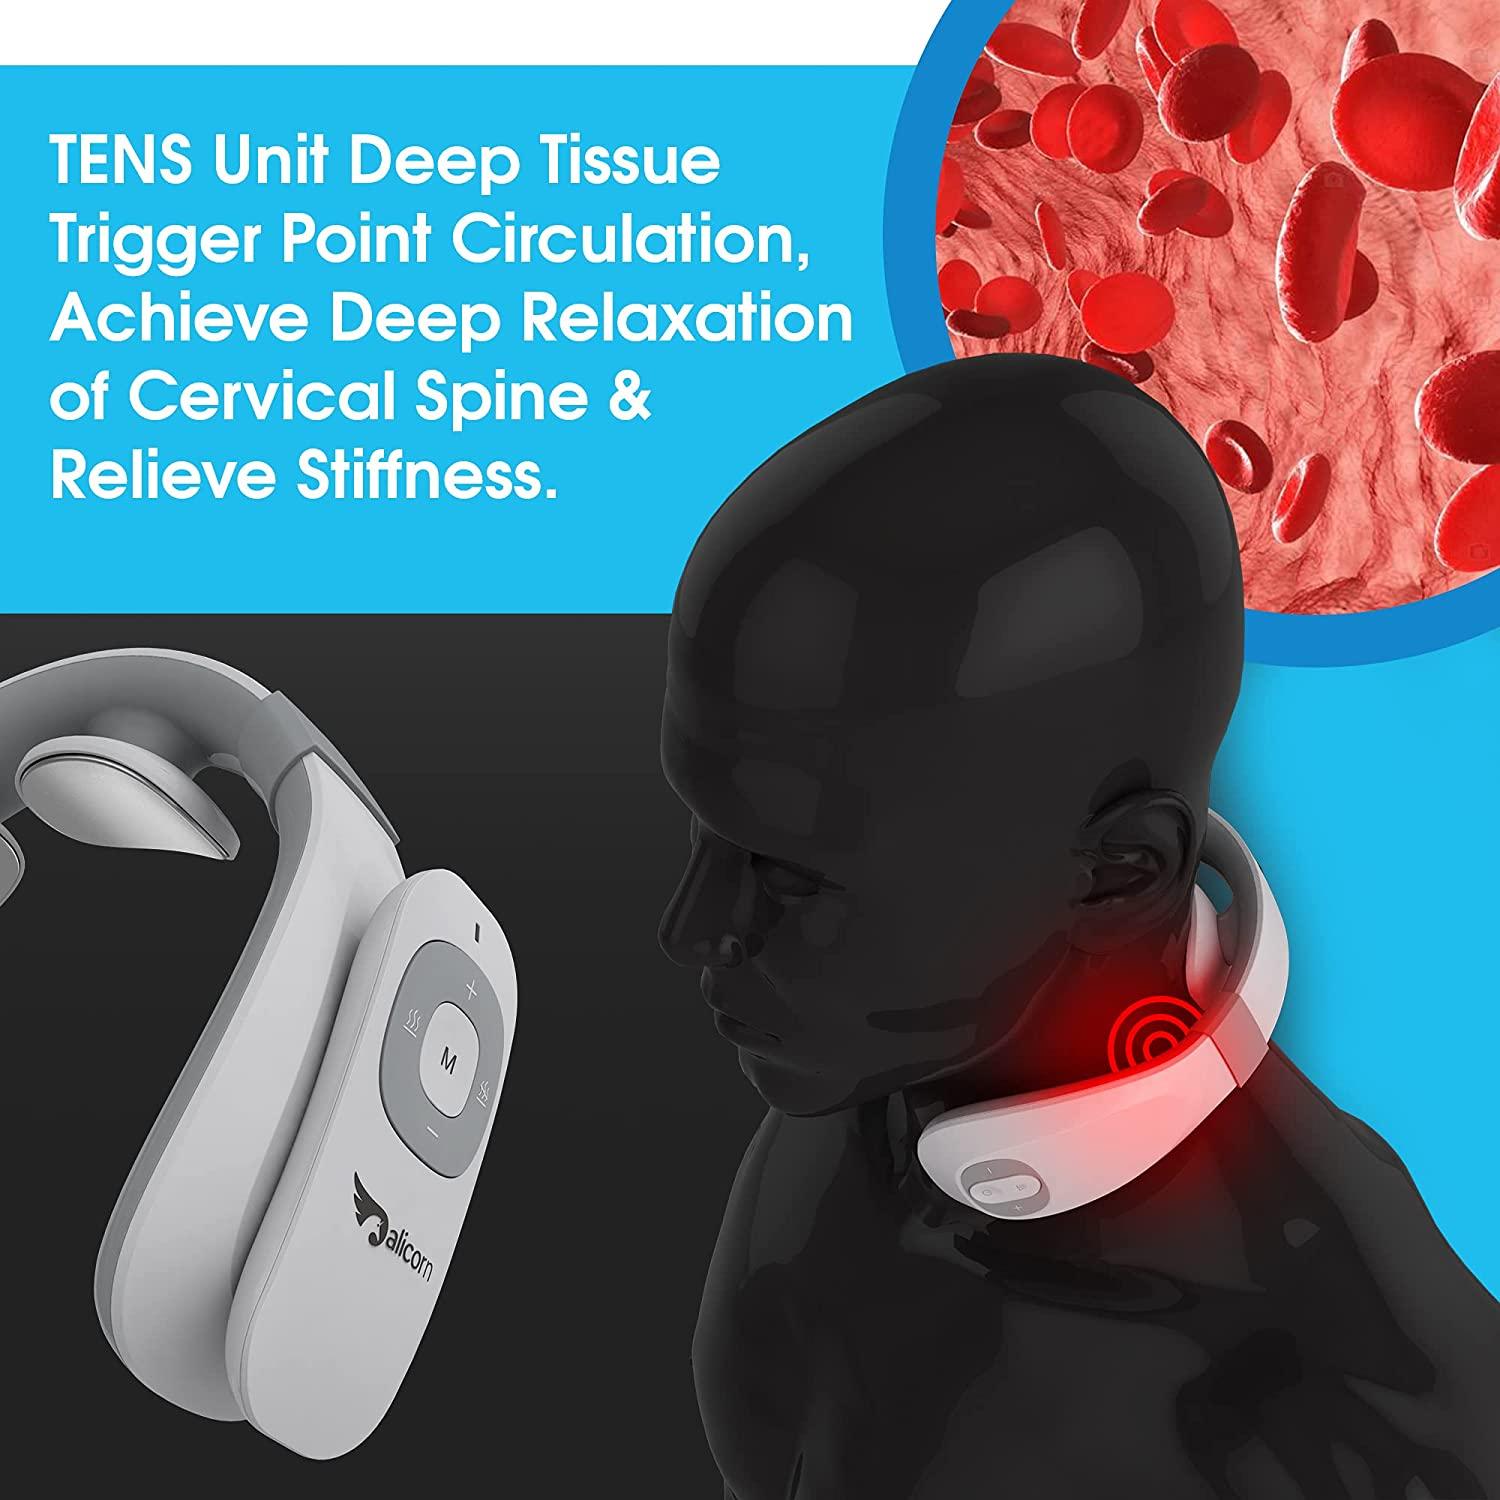 TENS Unit For Neck and Back Pain - TENS Smart Neck Massager For